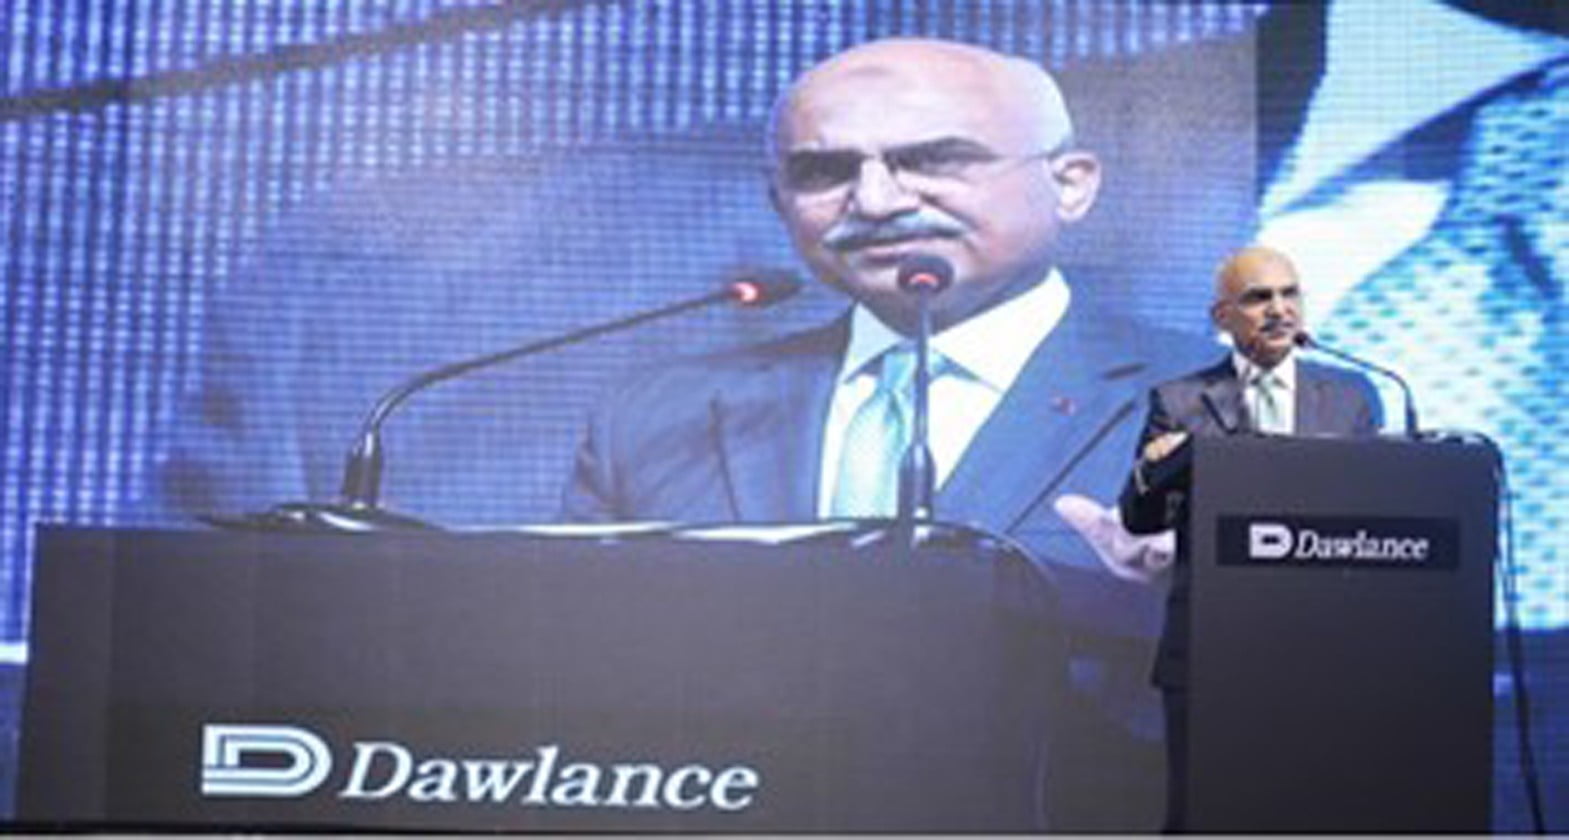 Dawlance hosted 2021 dealers convention at DPL2 Factory